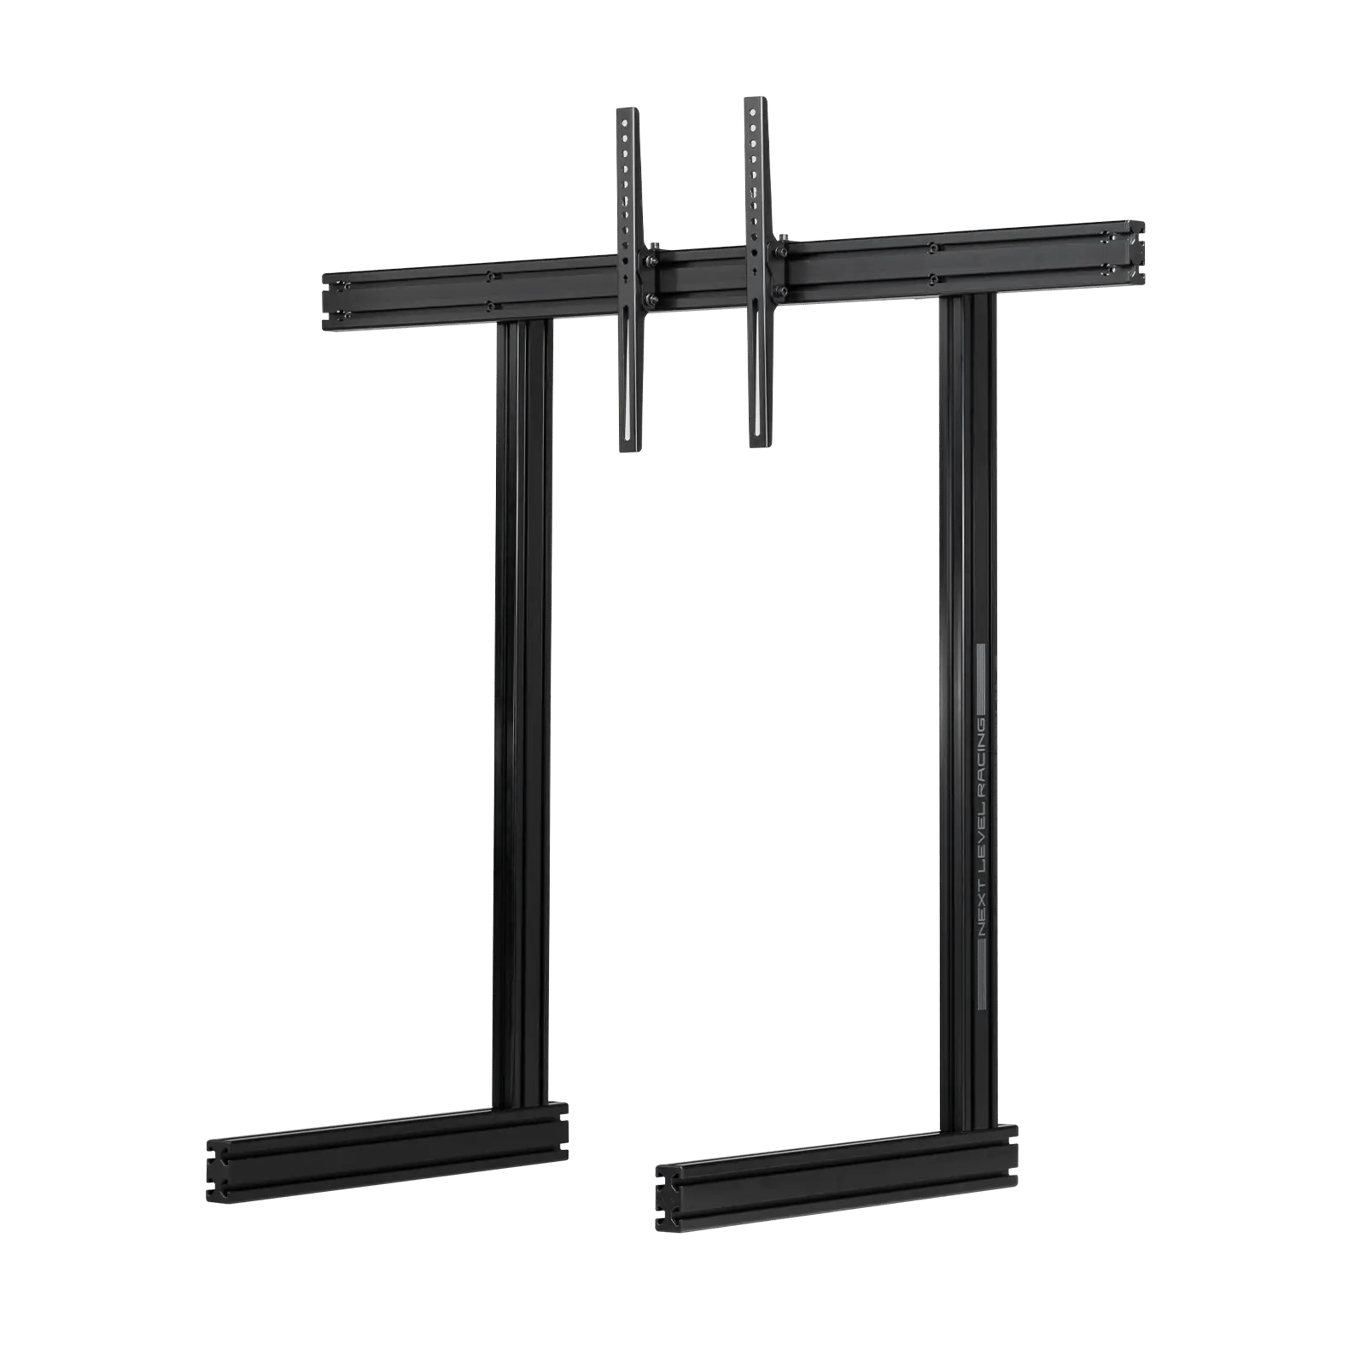 Next Level Racing ELITE Free Standing Single Monitor Stand Black 